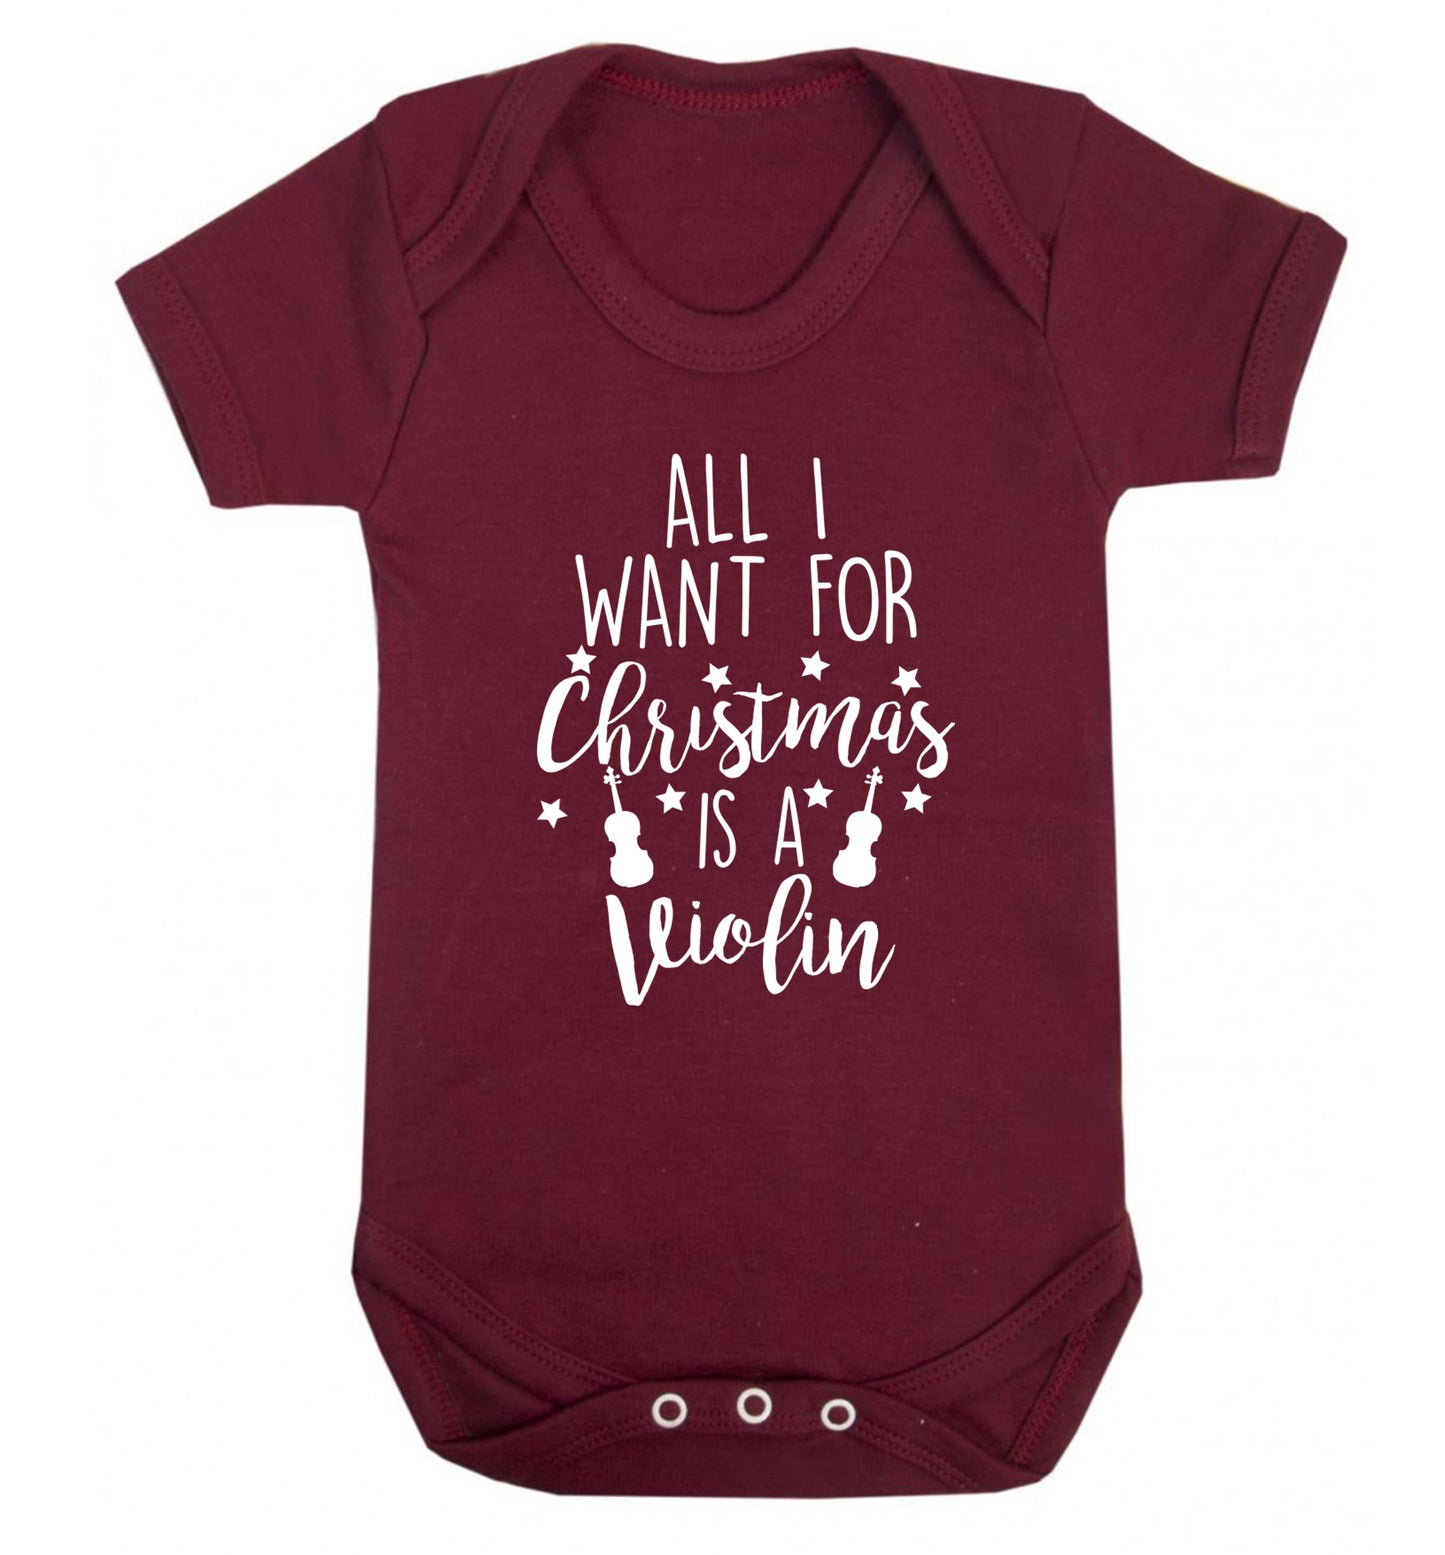 All I Want For Christmas is a Violin Baby Vest maroon 18-24 months